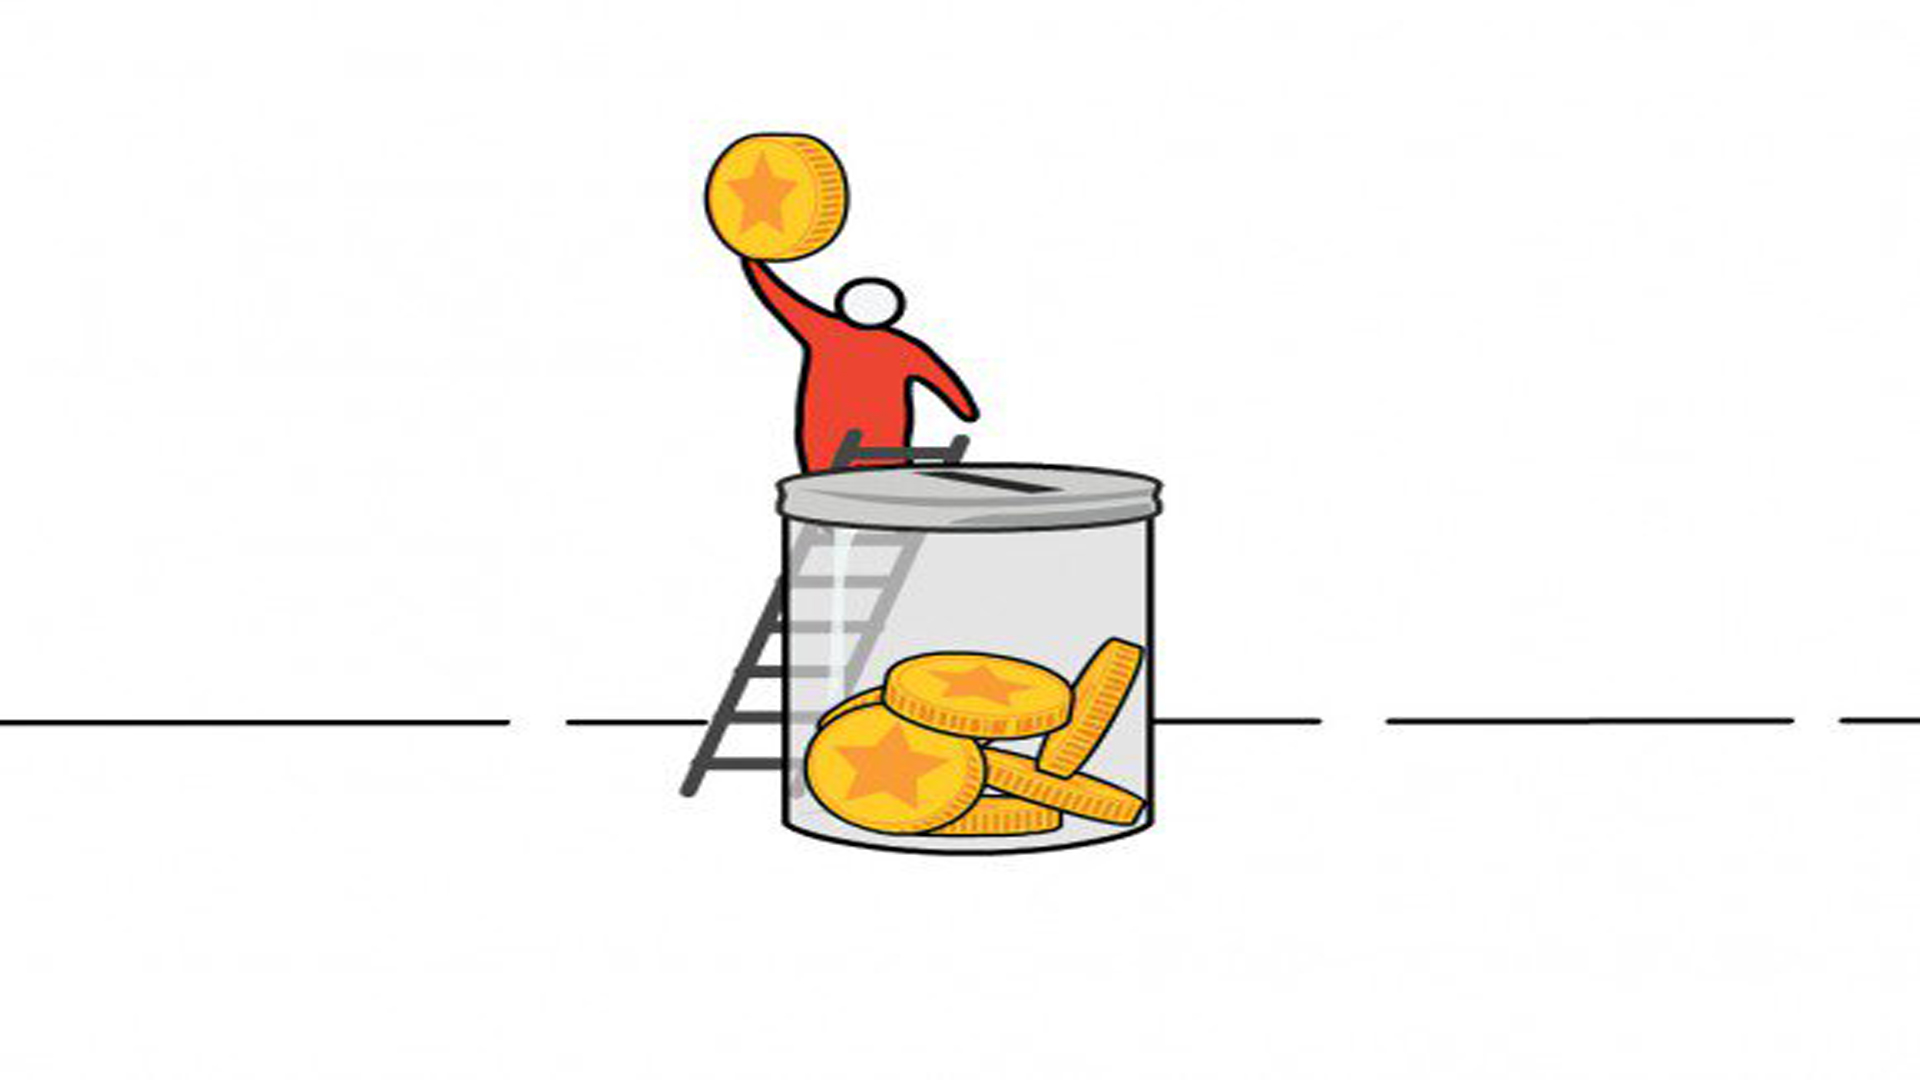 HSBC Sharesave Animation Screenshot - Character Holding A Coin Above His Head, standing on a ladder ready to drop the coin through a slit into the glass in front of him